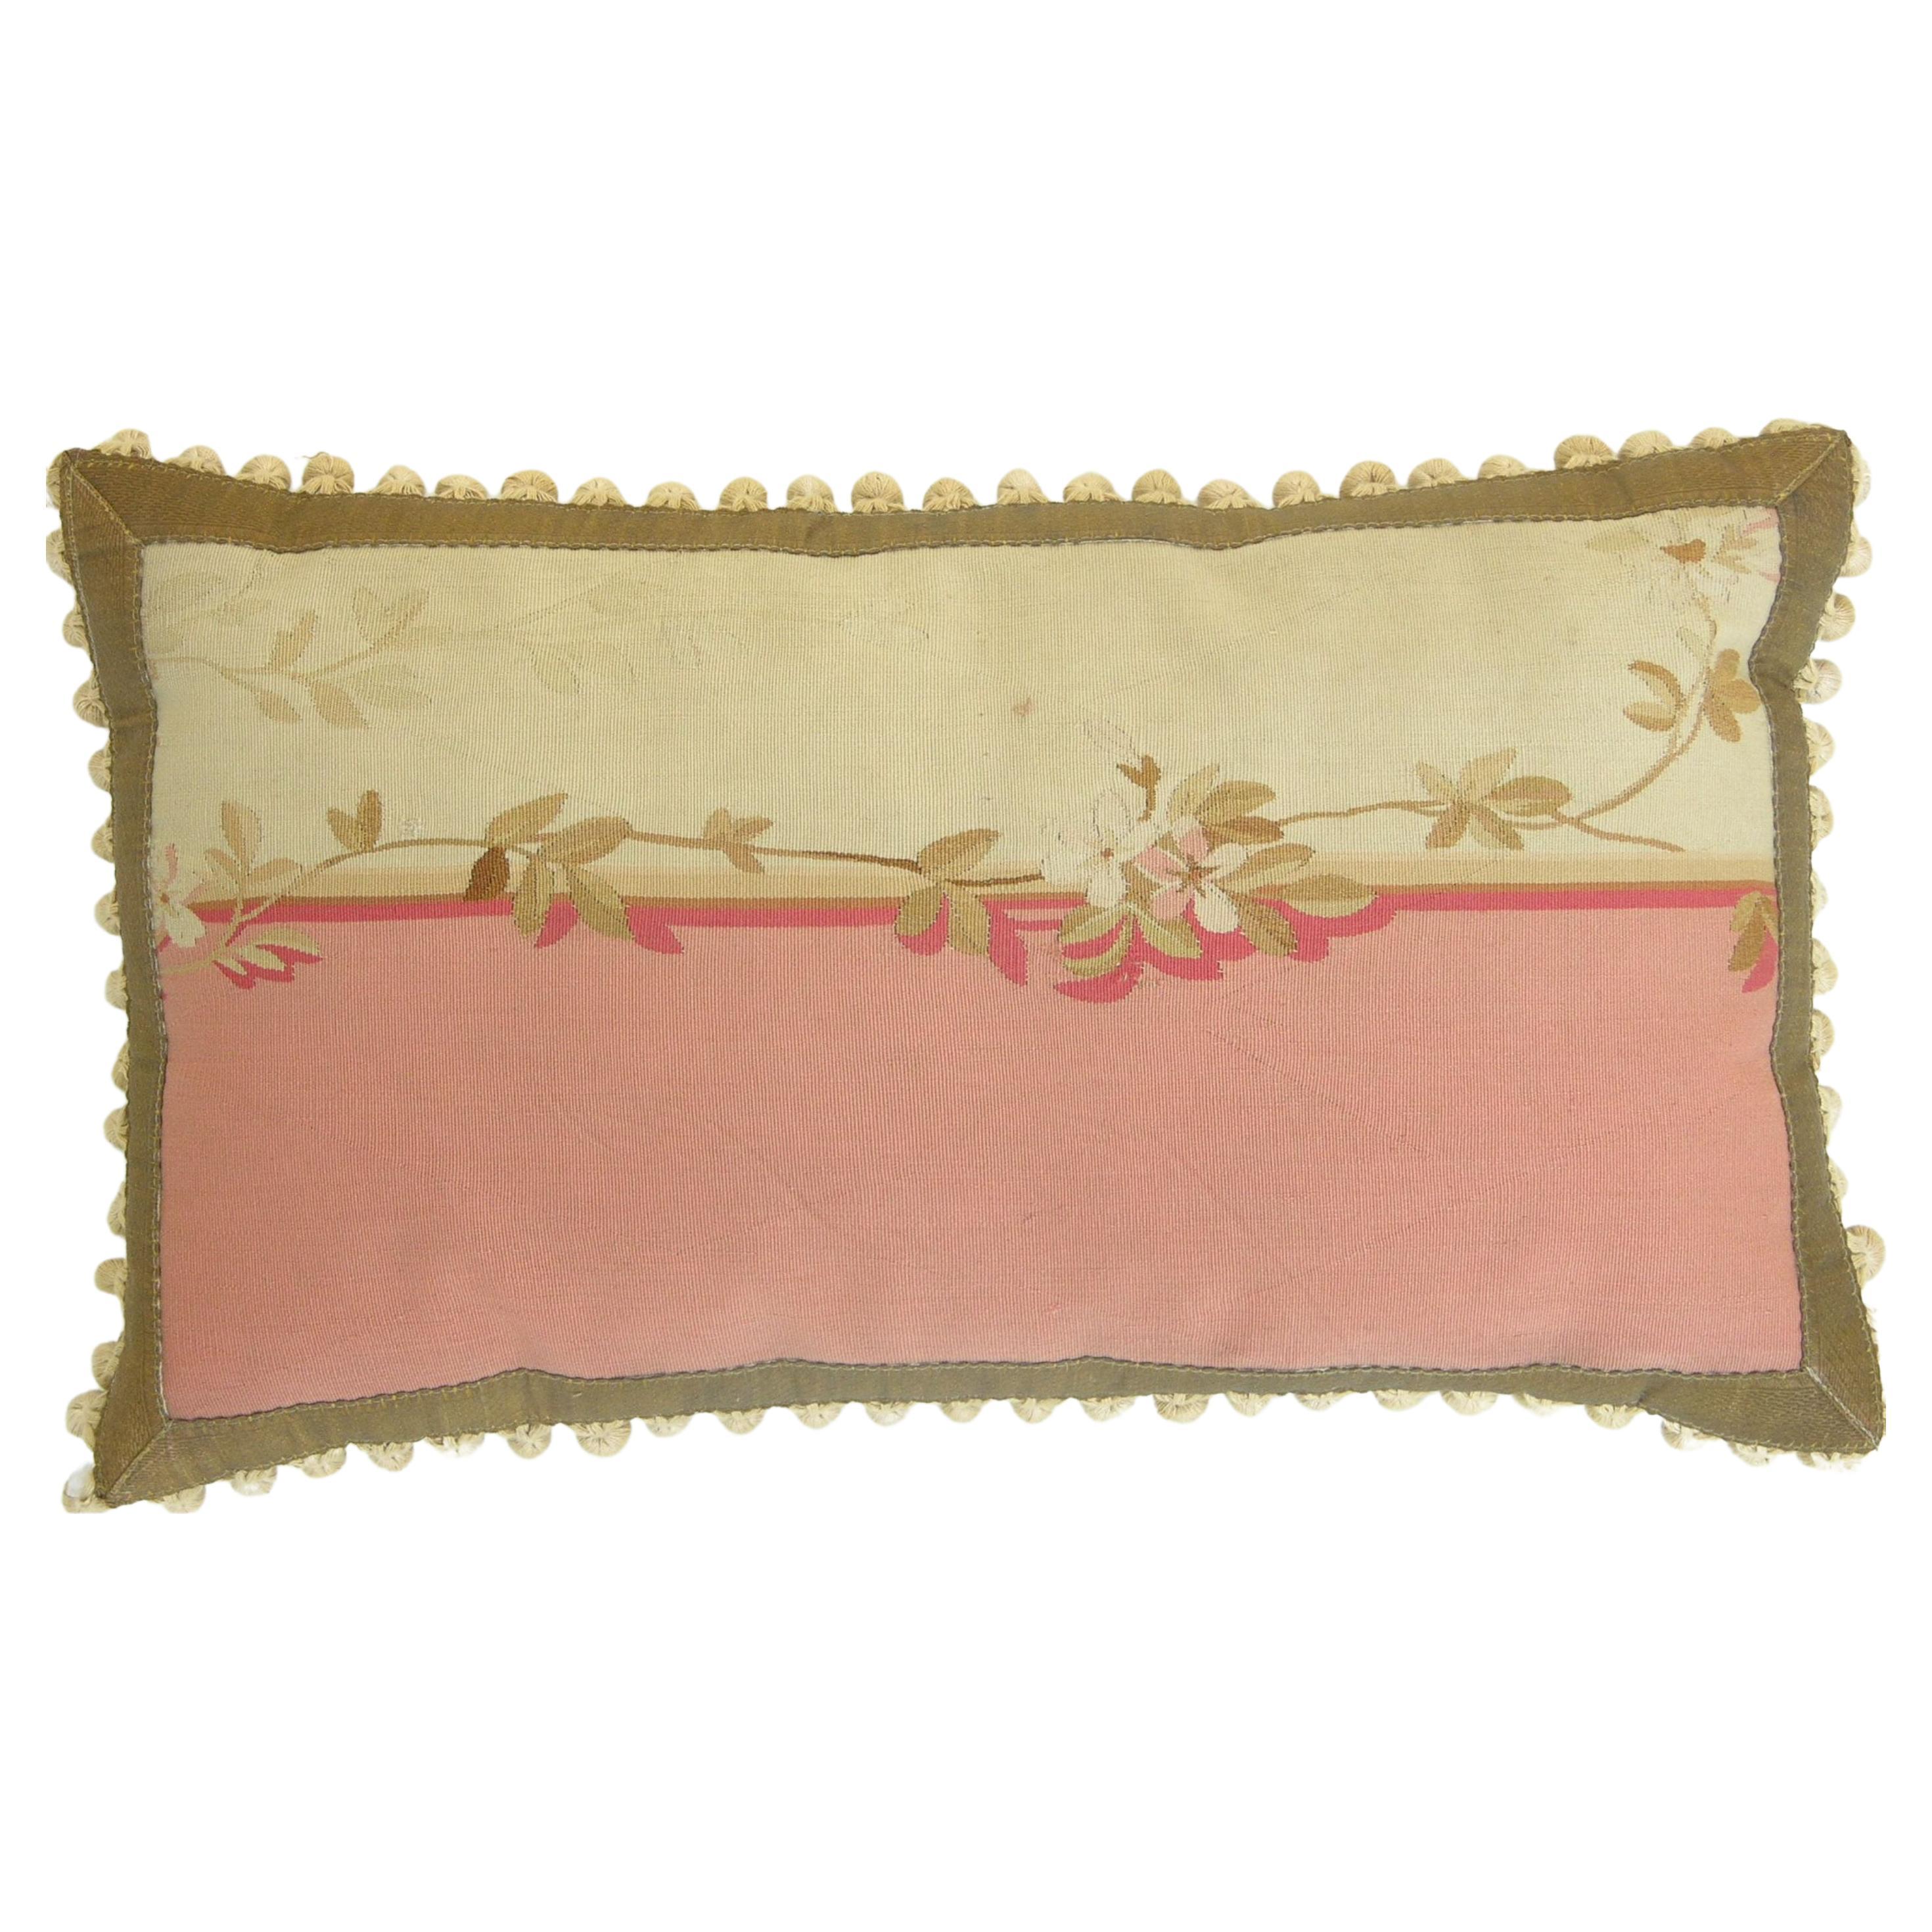 Circa 1850 Antique French Pillow For Sale